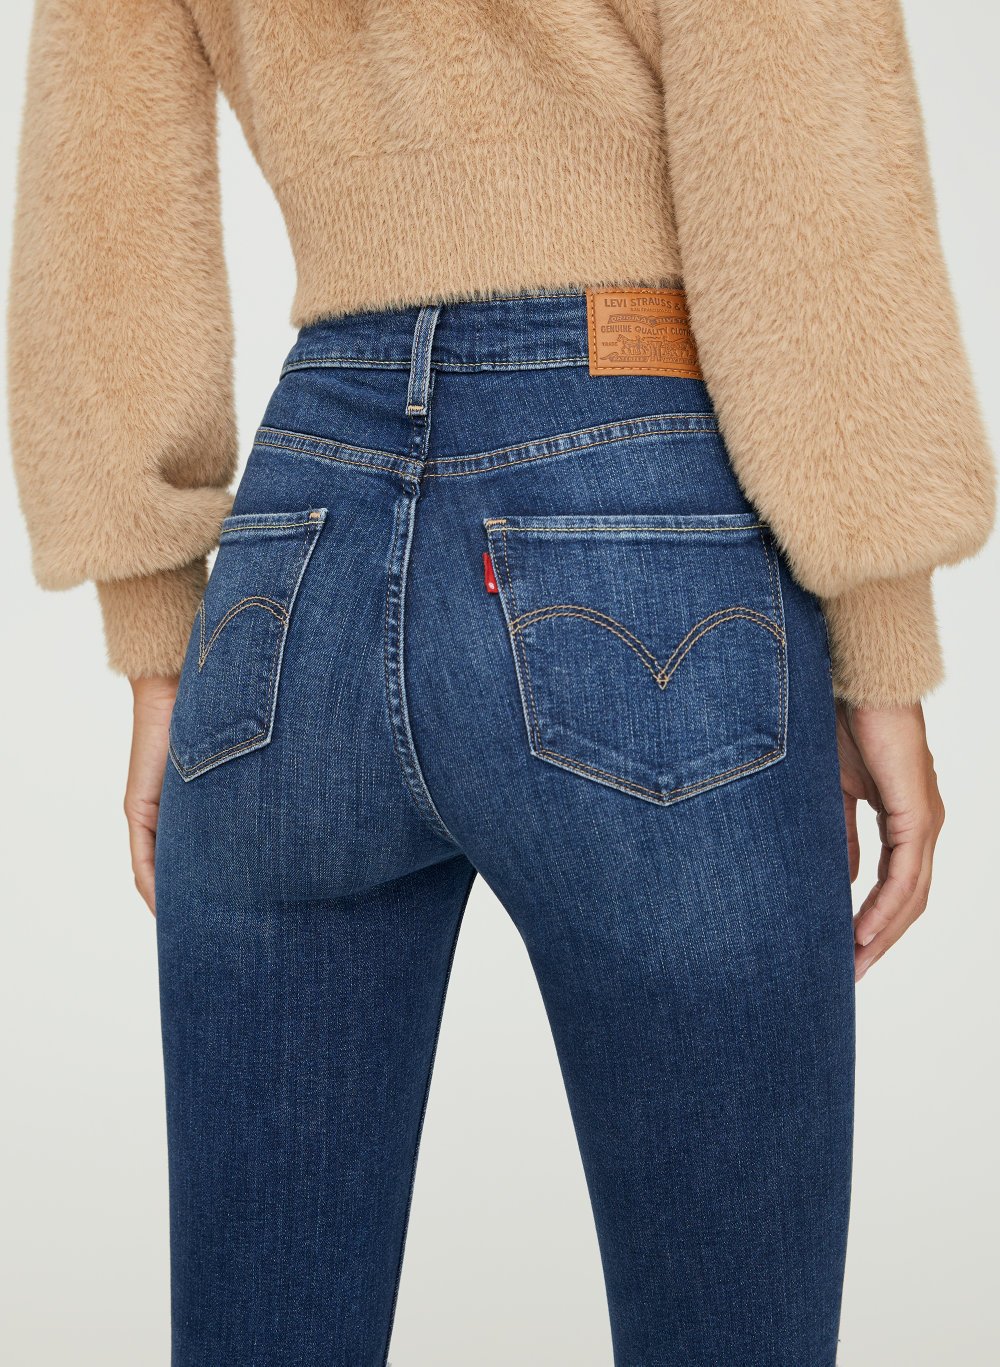 levi's 721 high rise skinny ripped